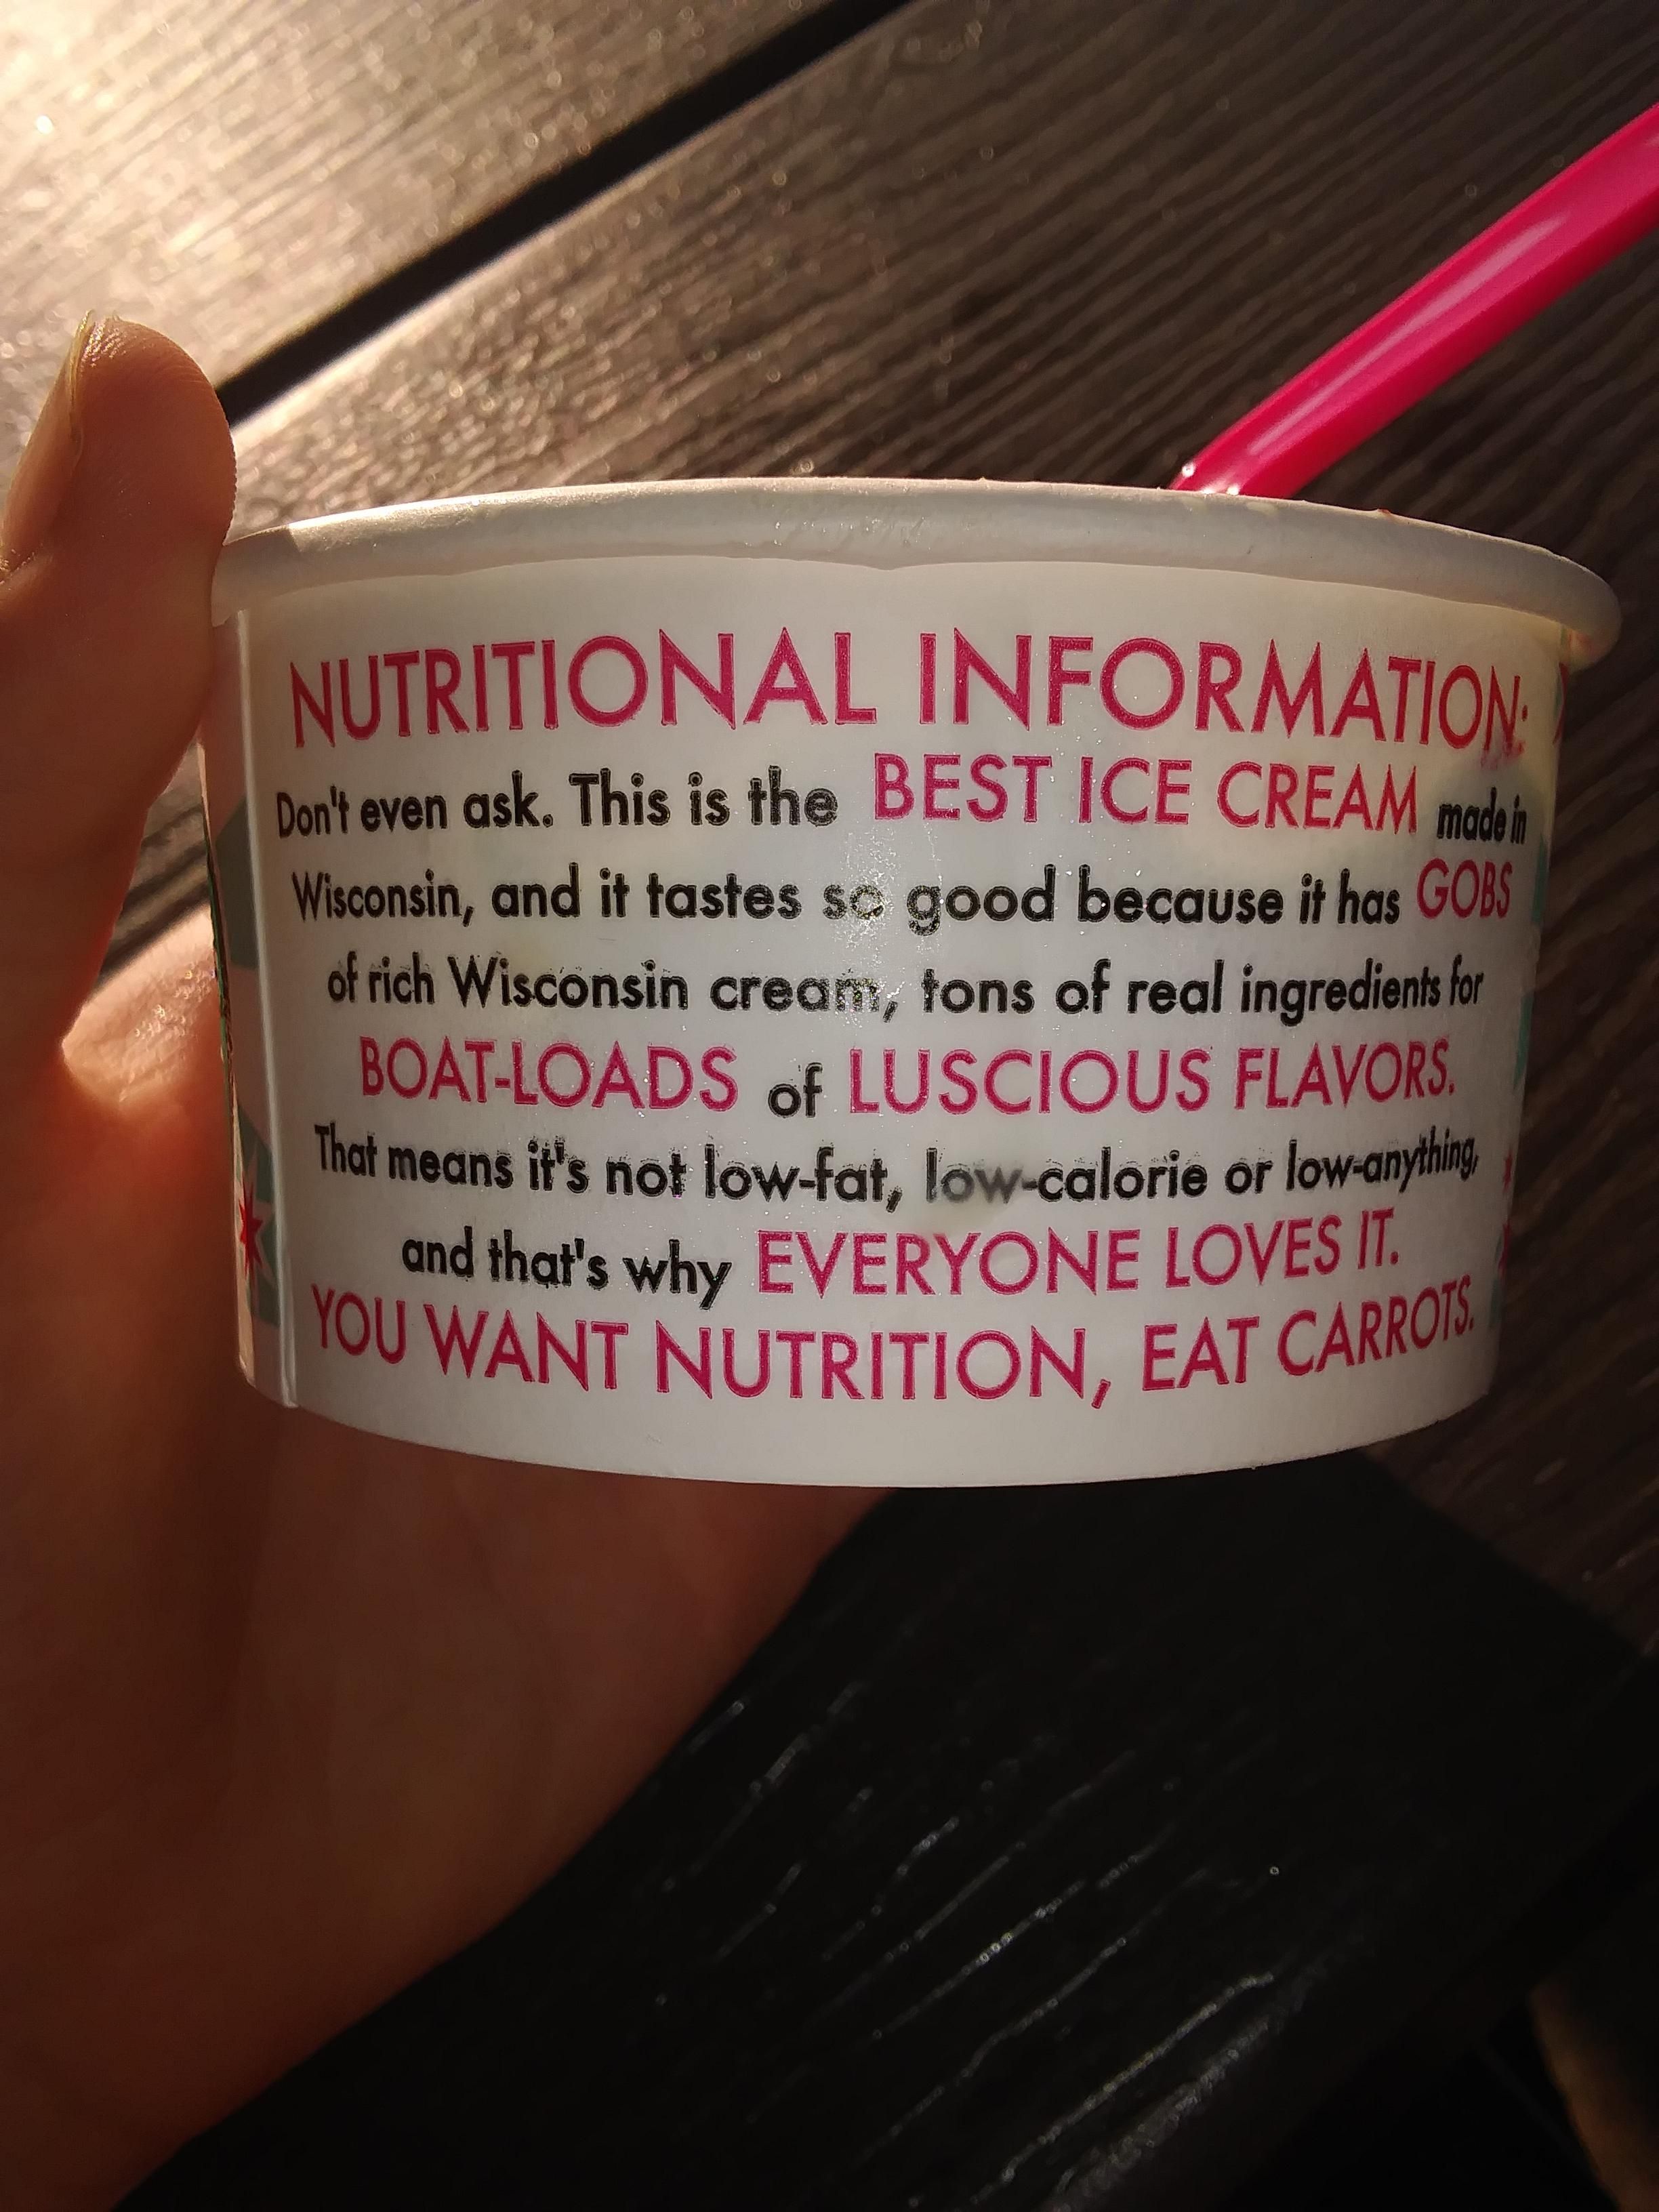 My local ice cream shop has this on their dishes.